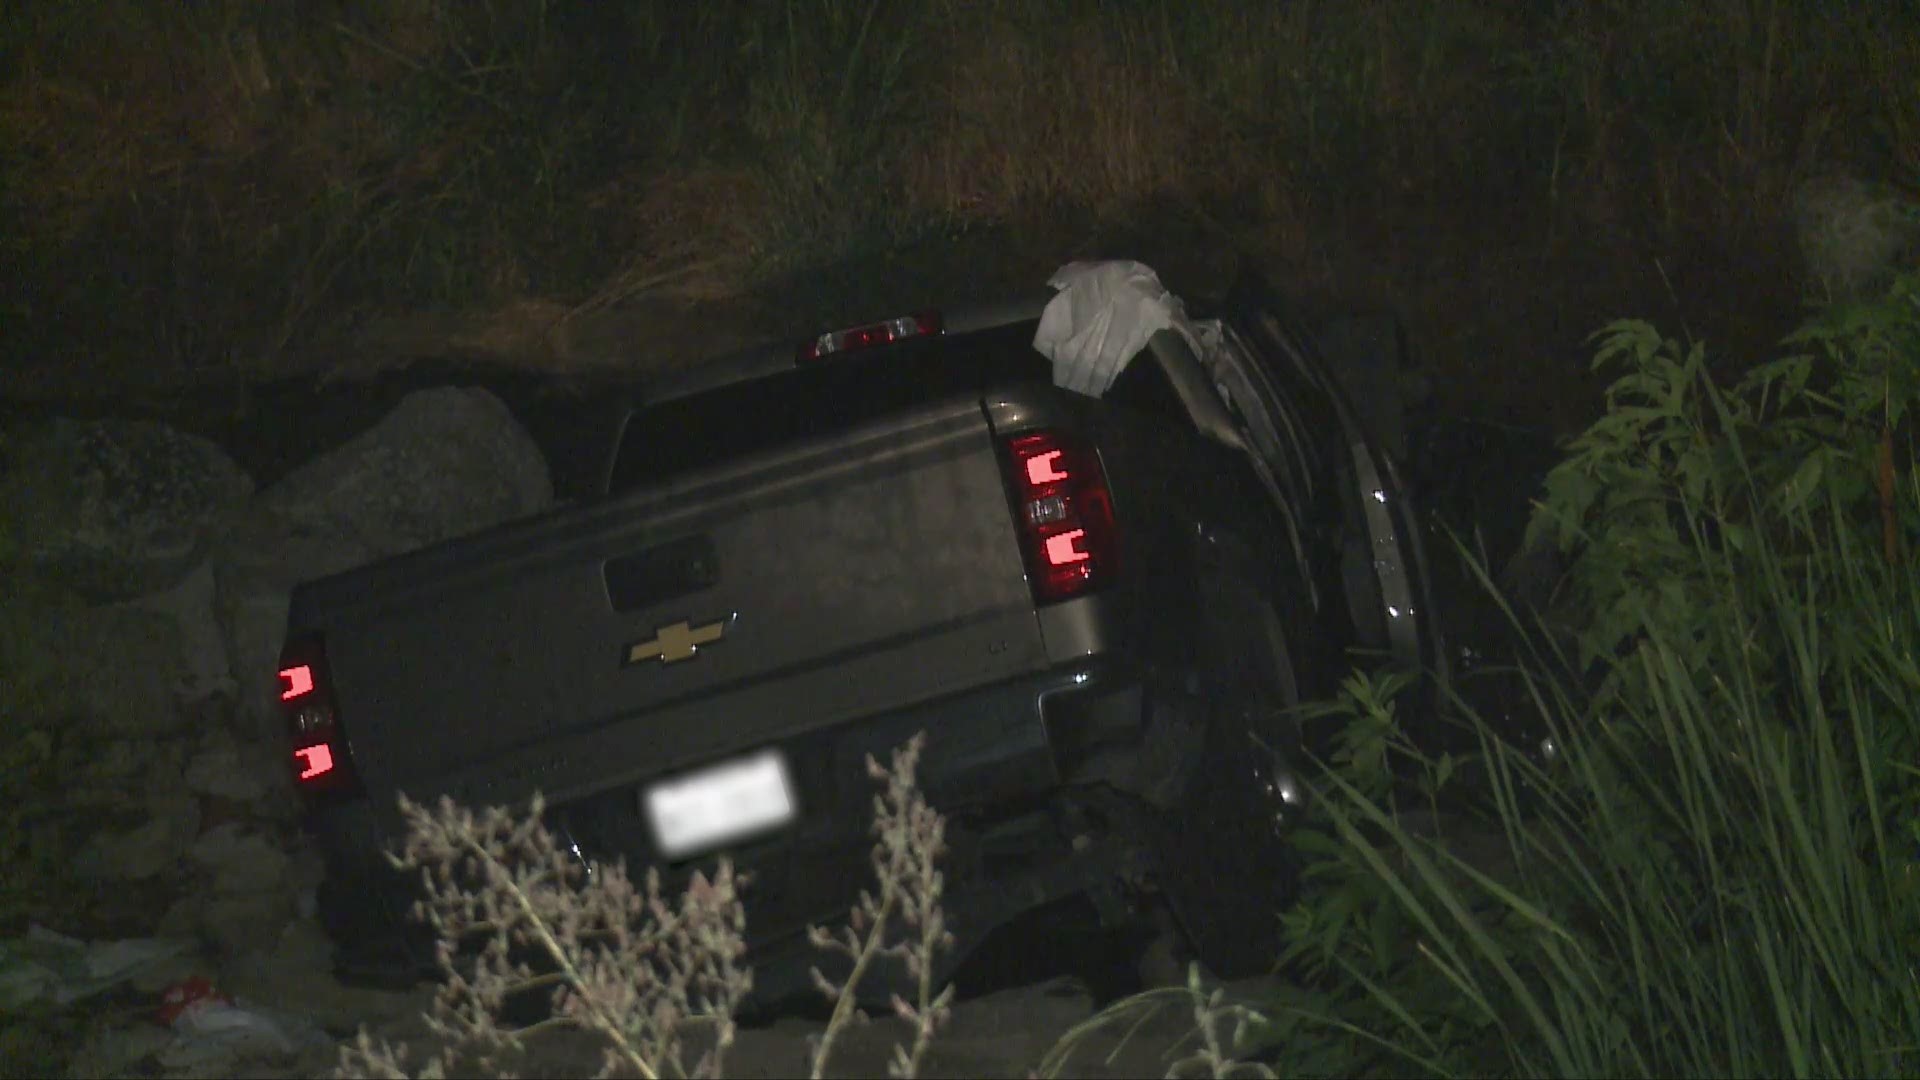 Fort Worth officers found a truck stuck in a ditch Saturday night. The four people in the vehicle were transported to a local hospital.